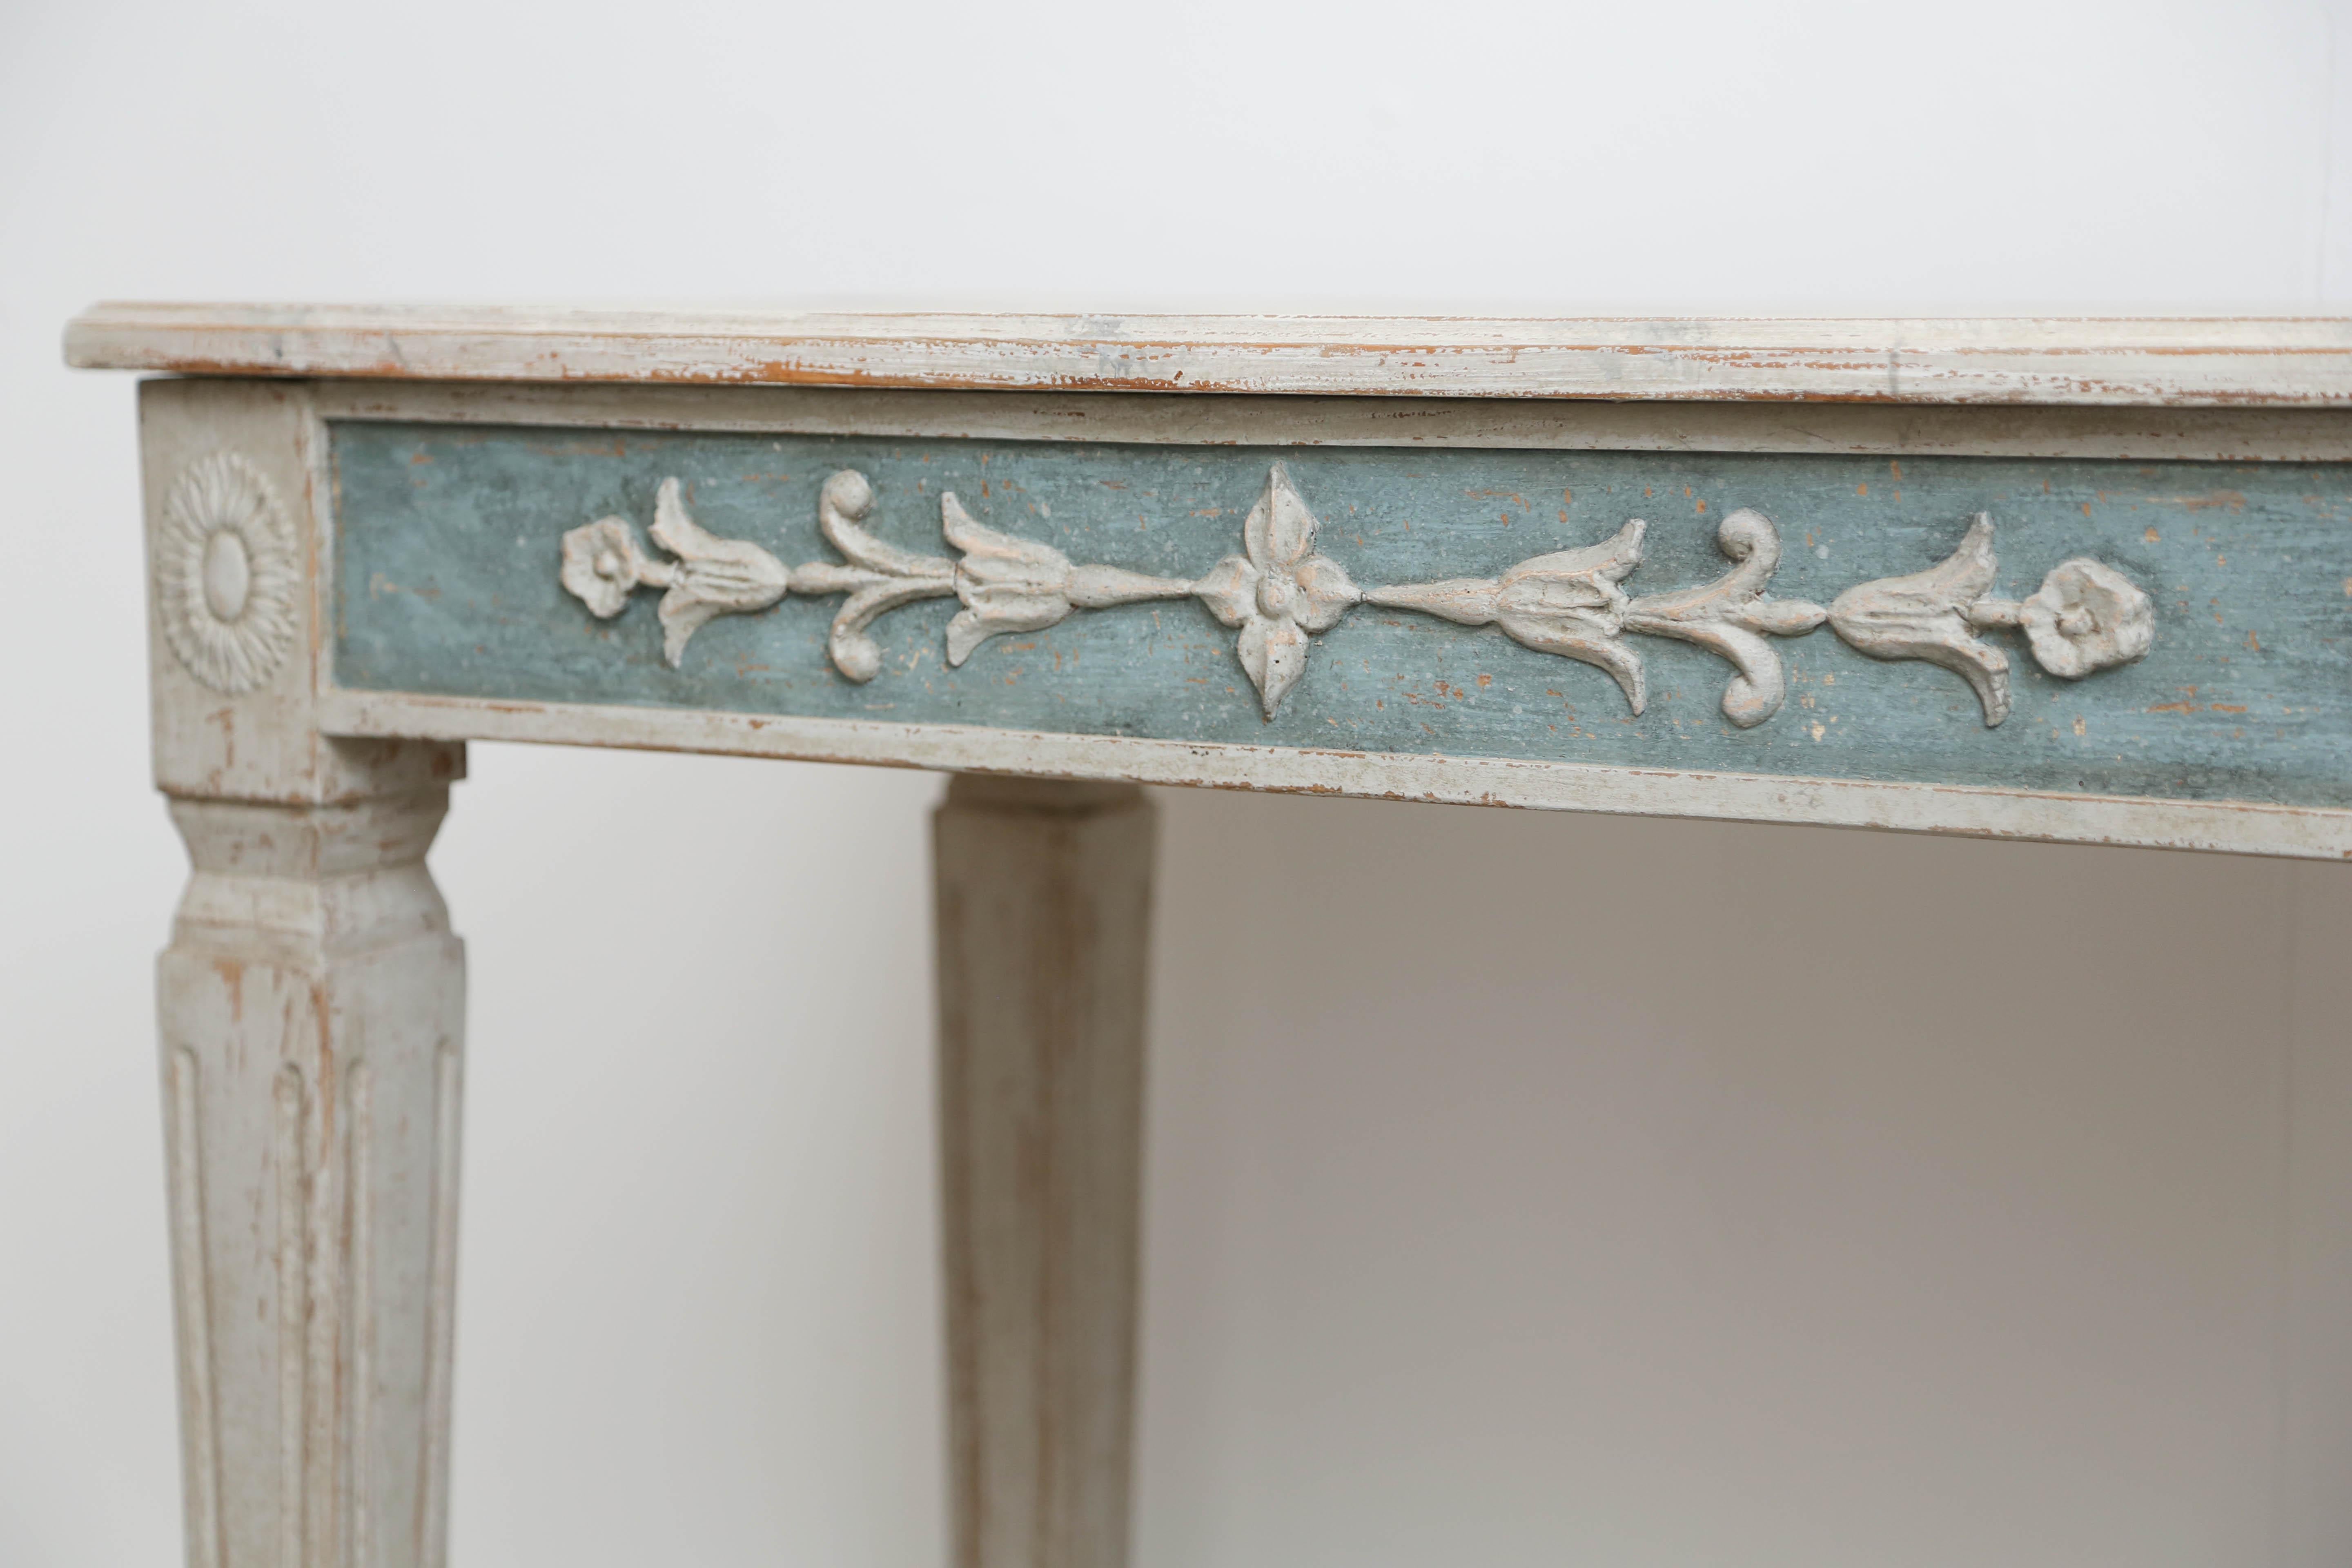 Antique Swedish Gustavian style painted console with faux grey marble top, apron adorned with rosettes and bell flower carvings and painted a lovely Swedish blue background, square tapering fluted legs, console is painted in Swedish grey distressed